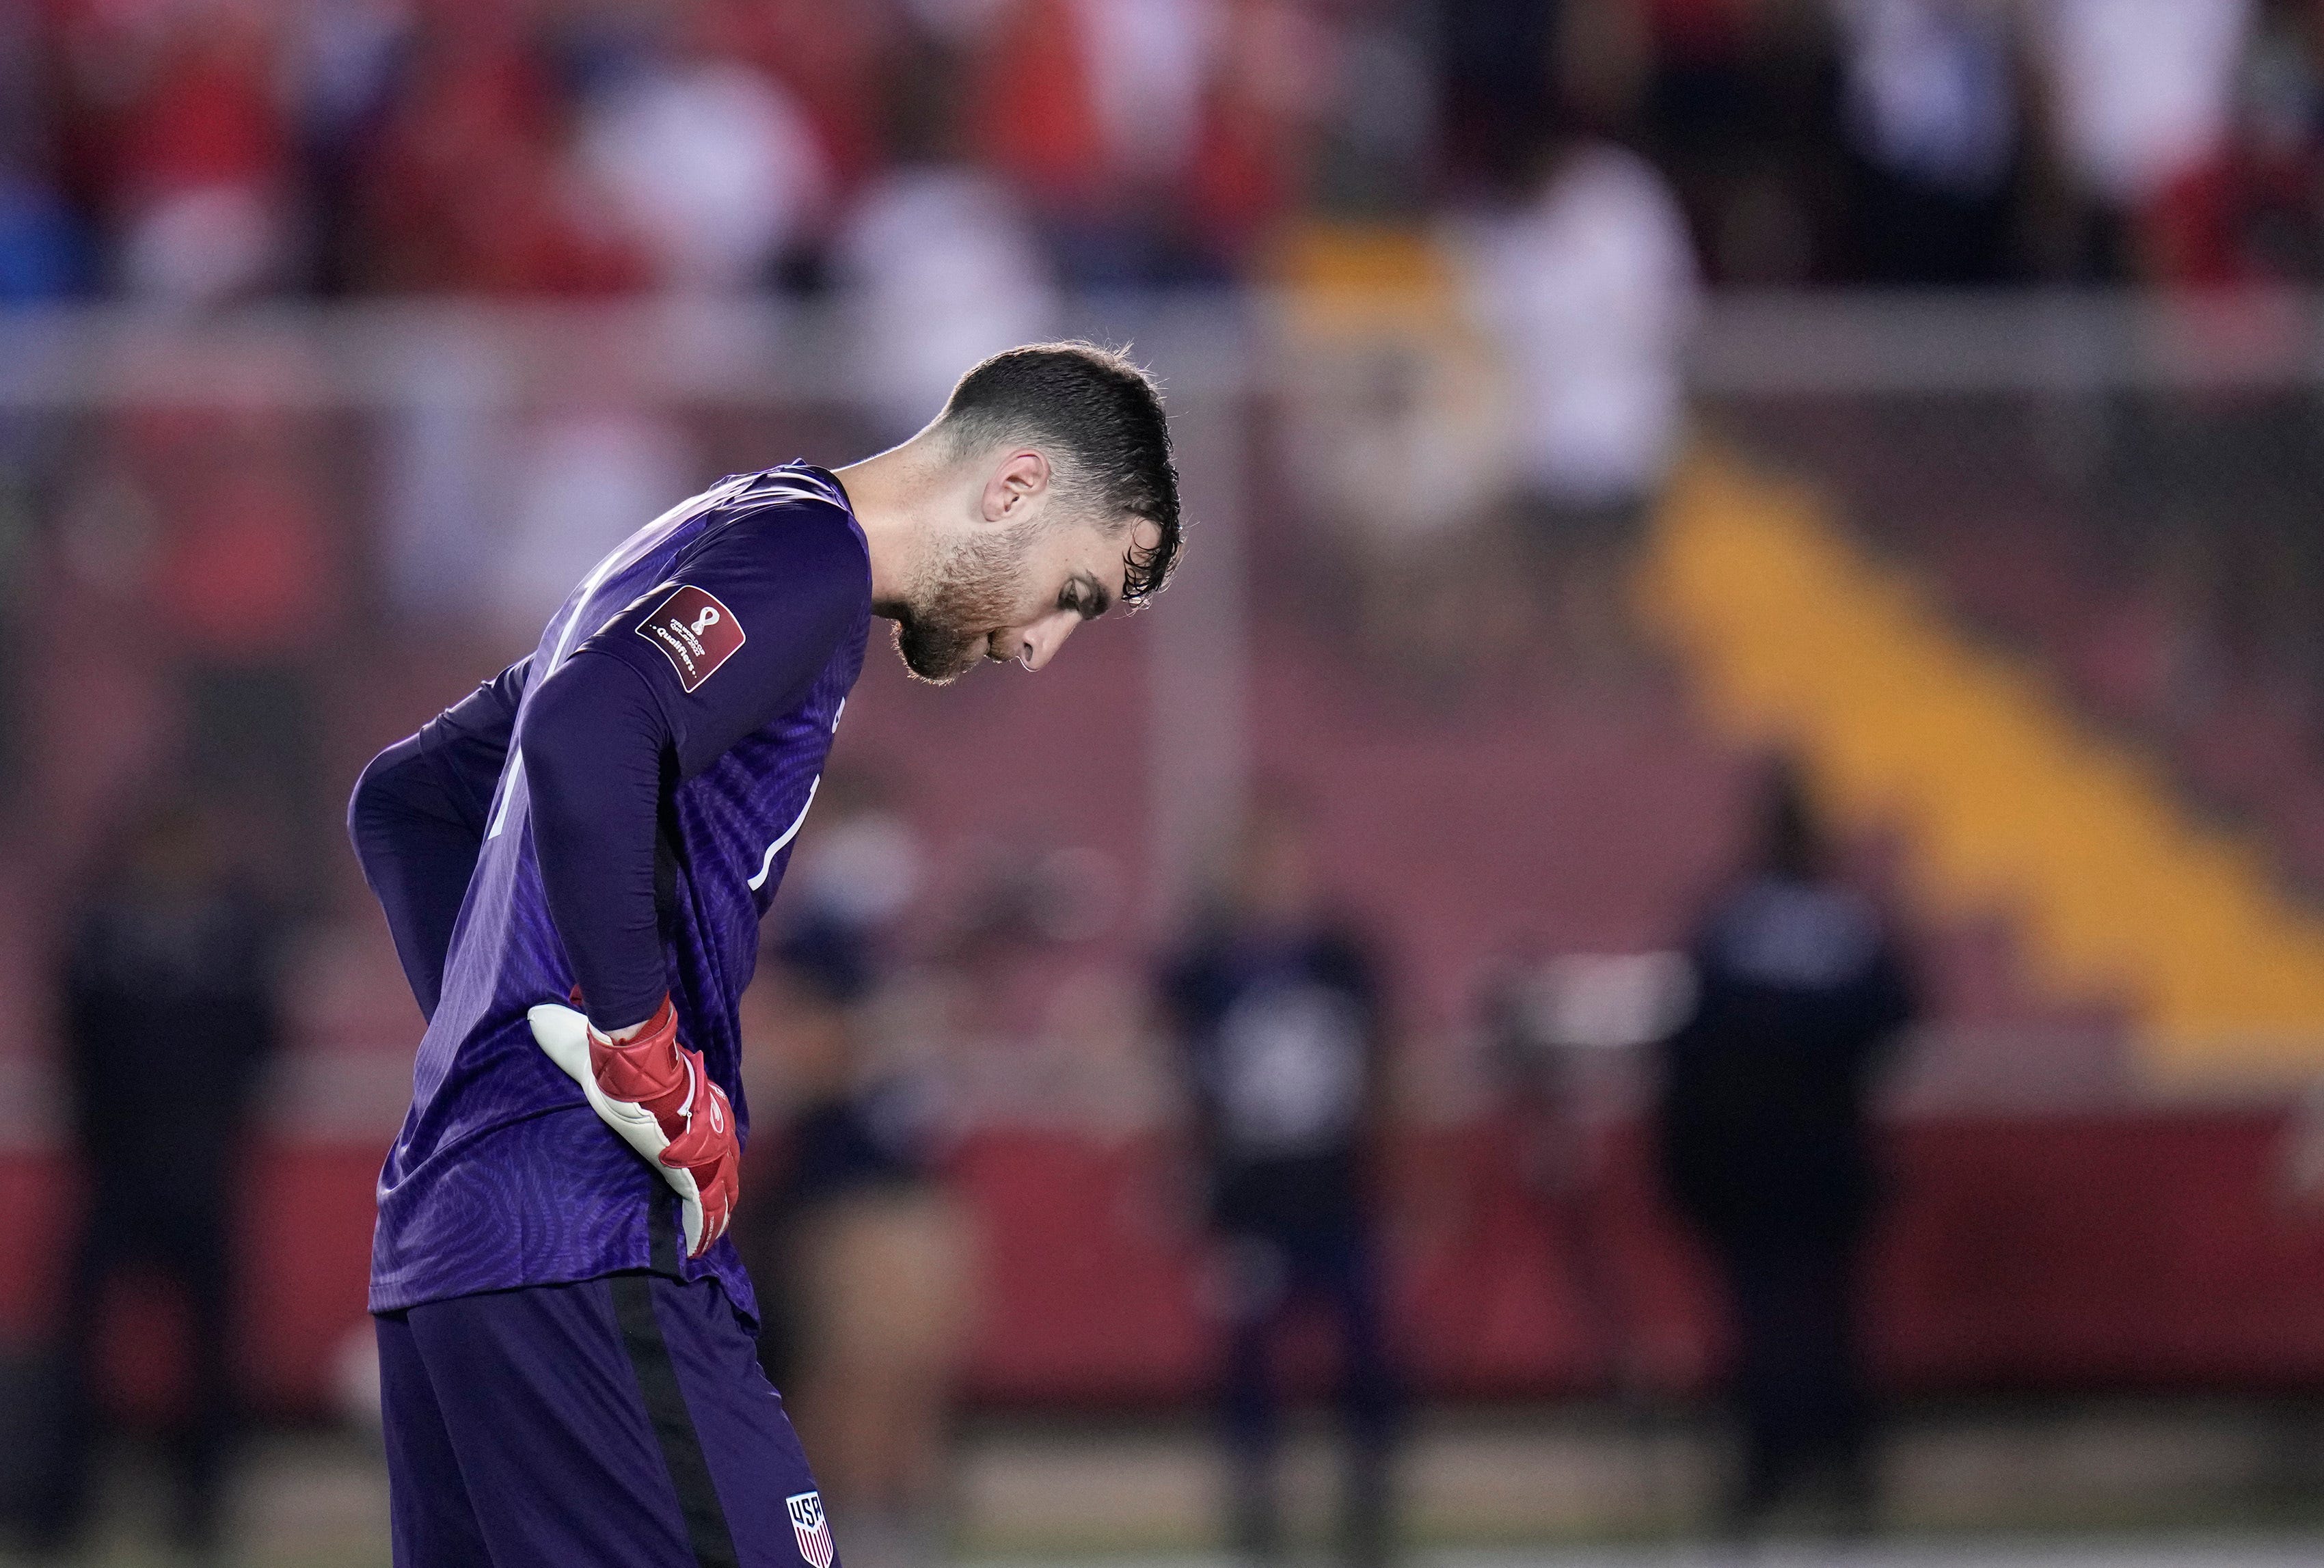 U.S. men's national soccer team loses against Panama in Concacaf World Cup qualifier